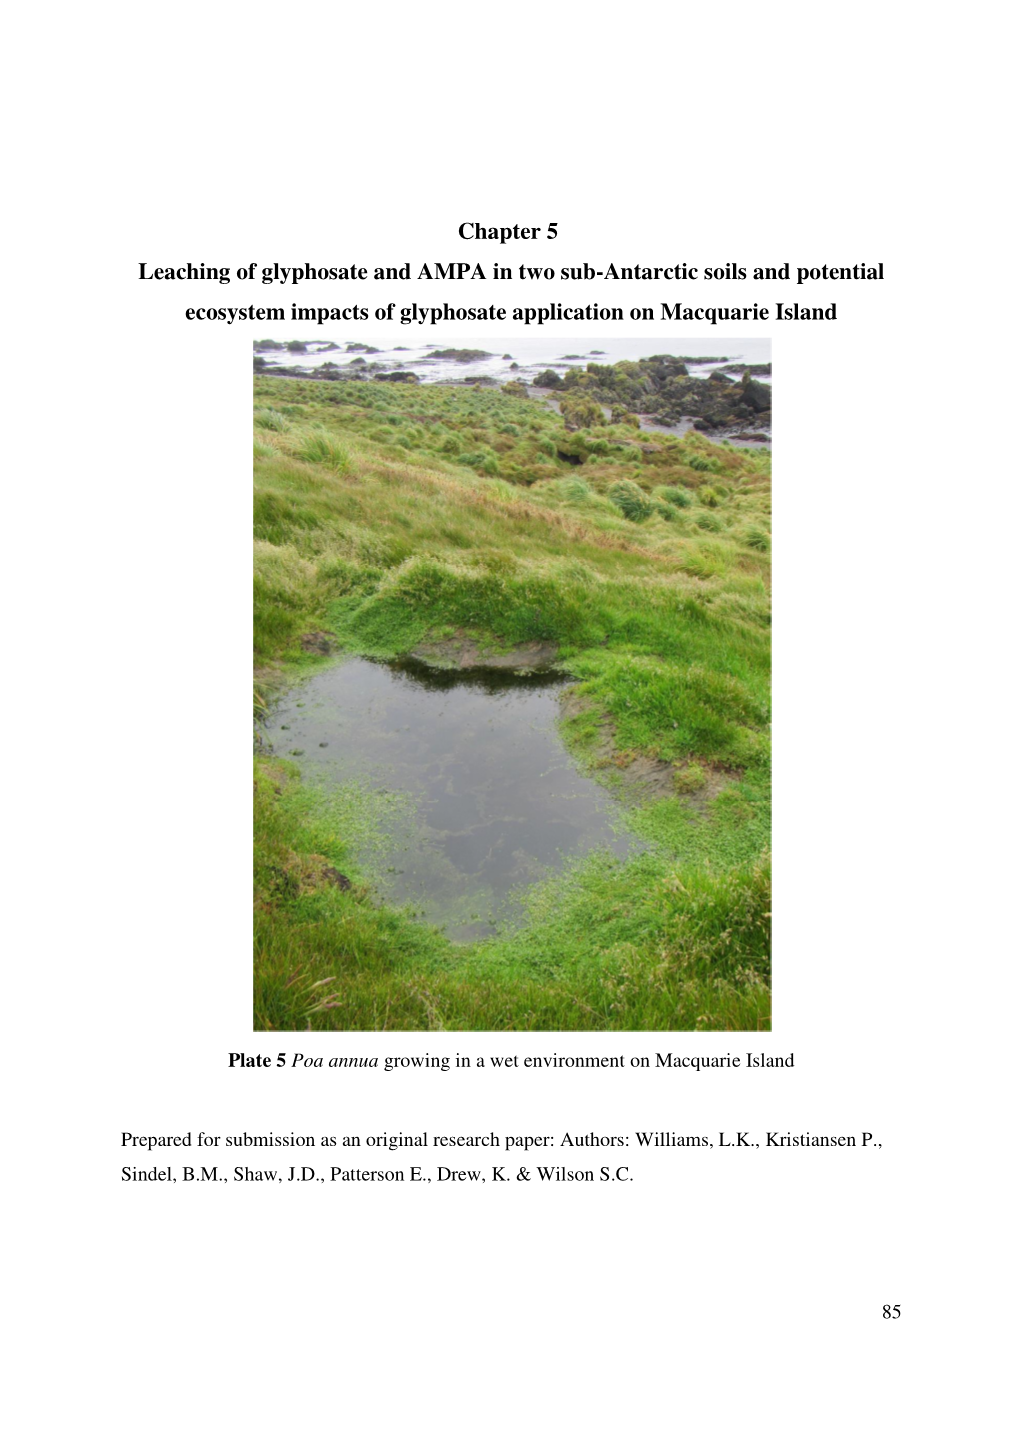 Chapter 5 Leaching of Glyphosate and AMPA in Two Sub-Antarctic Soils and Potential Ecosystem Impacts of Glyphosate Application on Macquarie Island